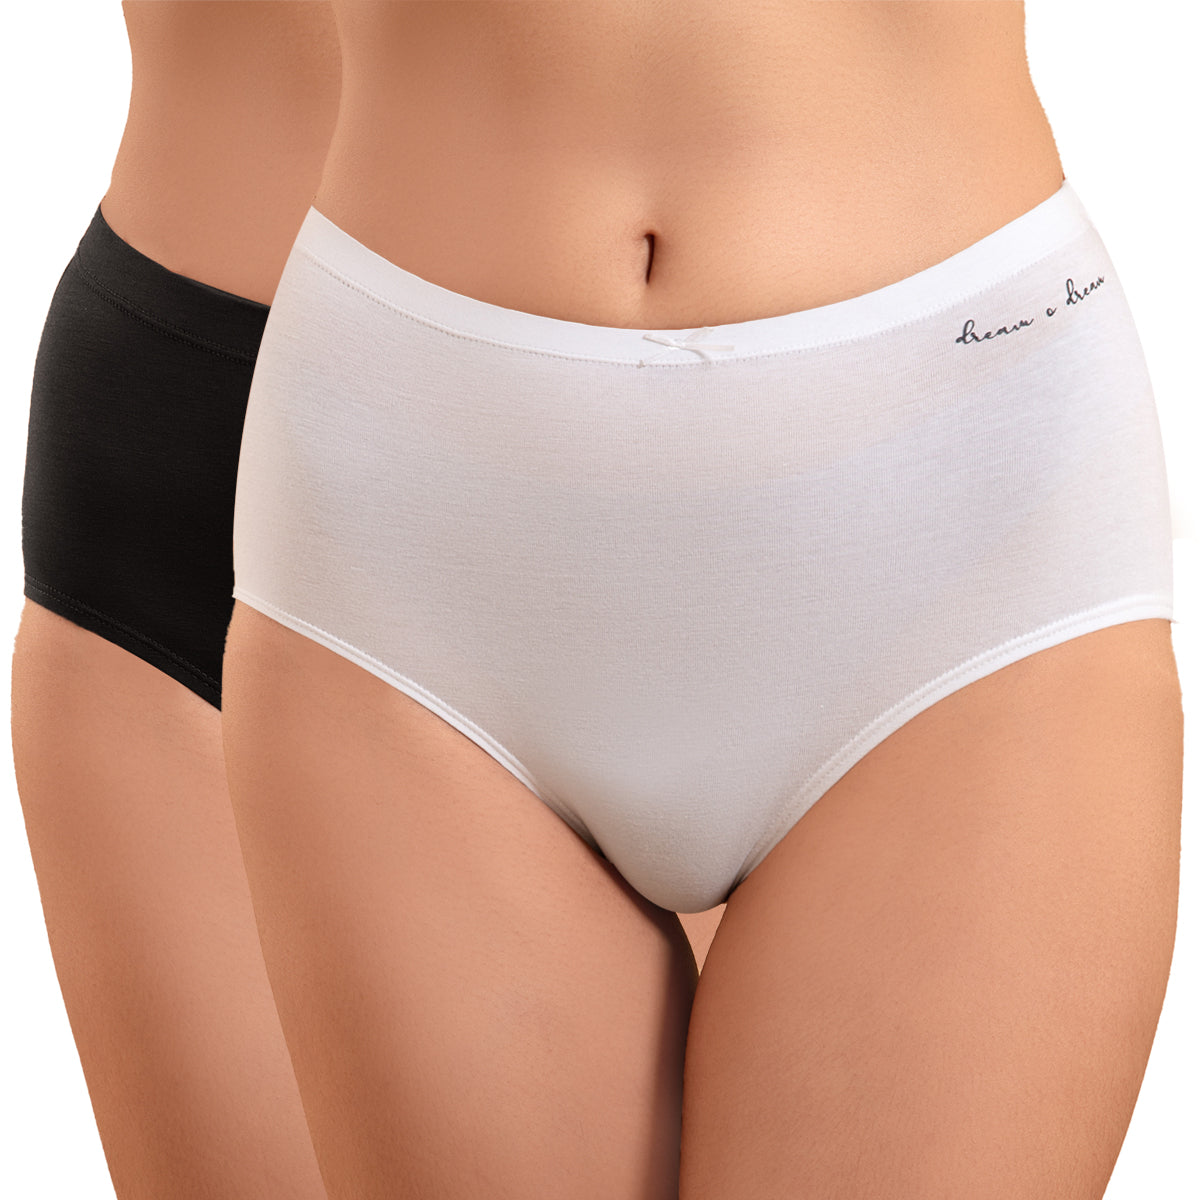 NYKD X Masaba Pack Of 2 Cotton Full Brief with Anti odor-NYP015--Anthracite, White